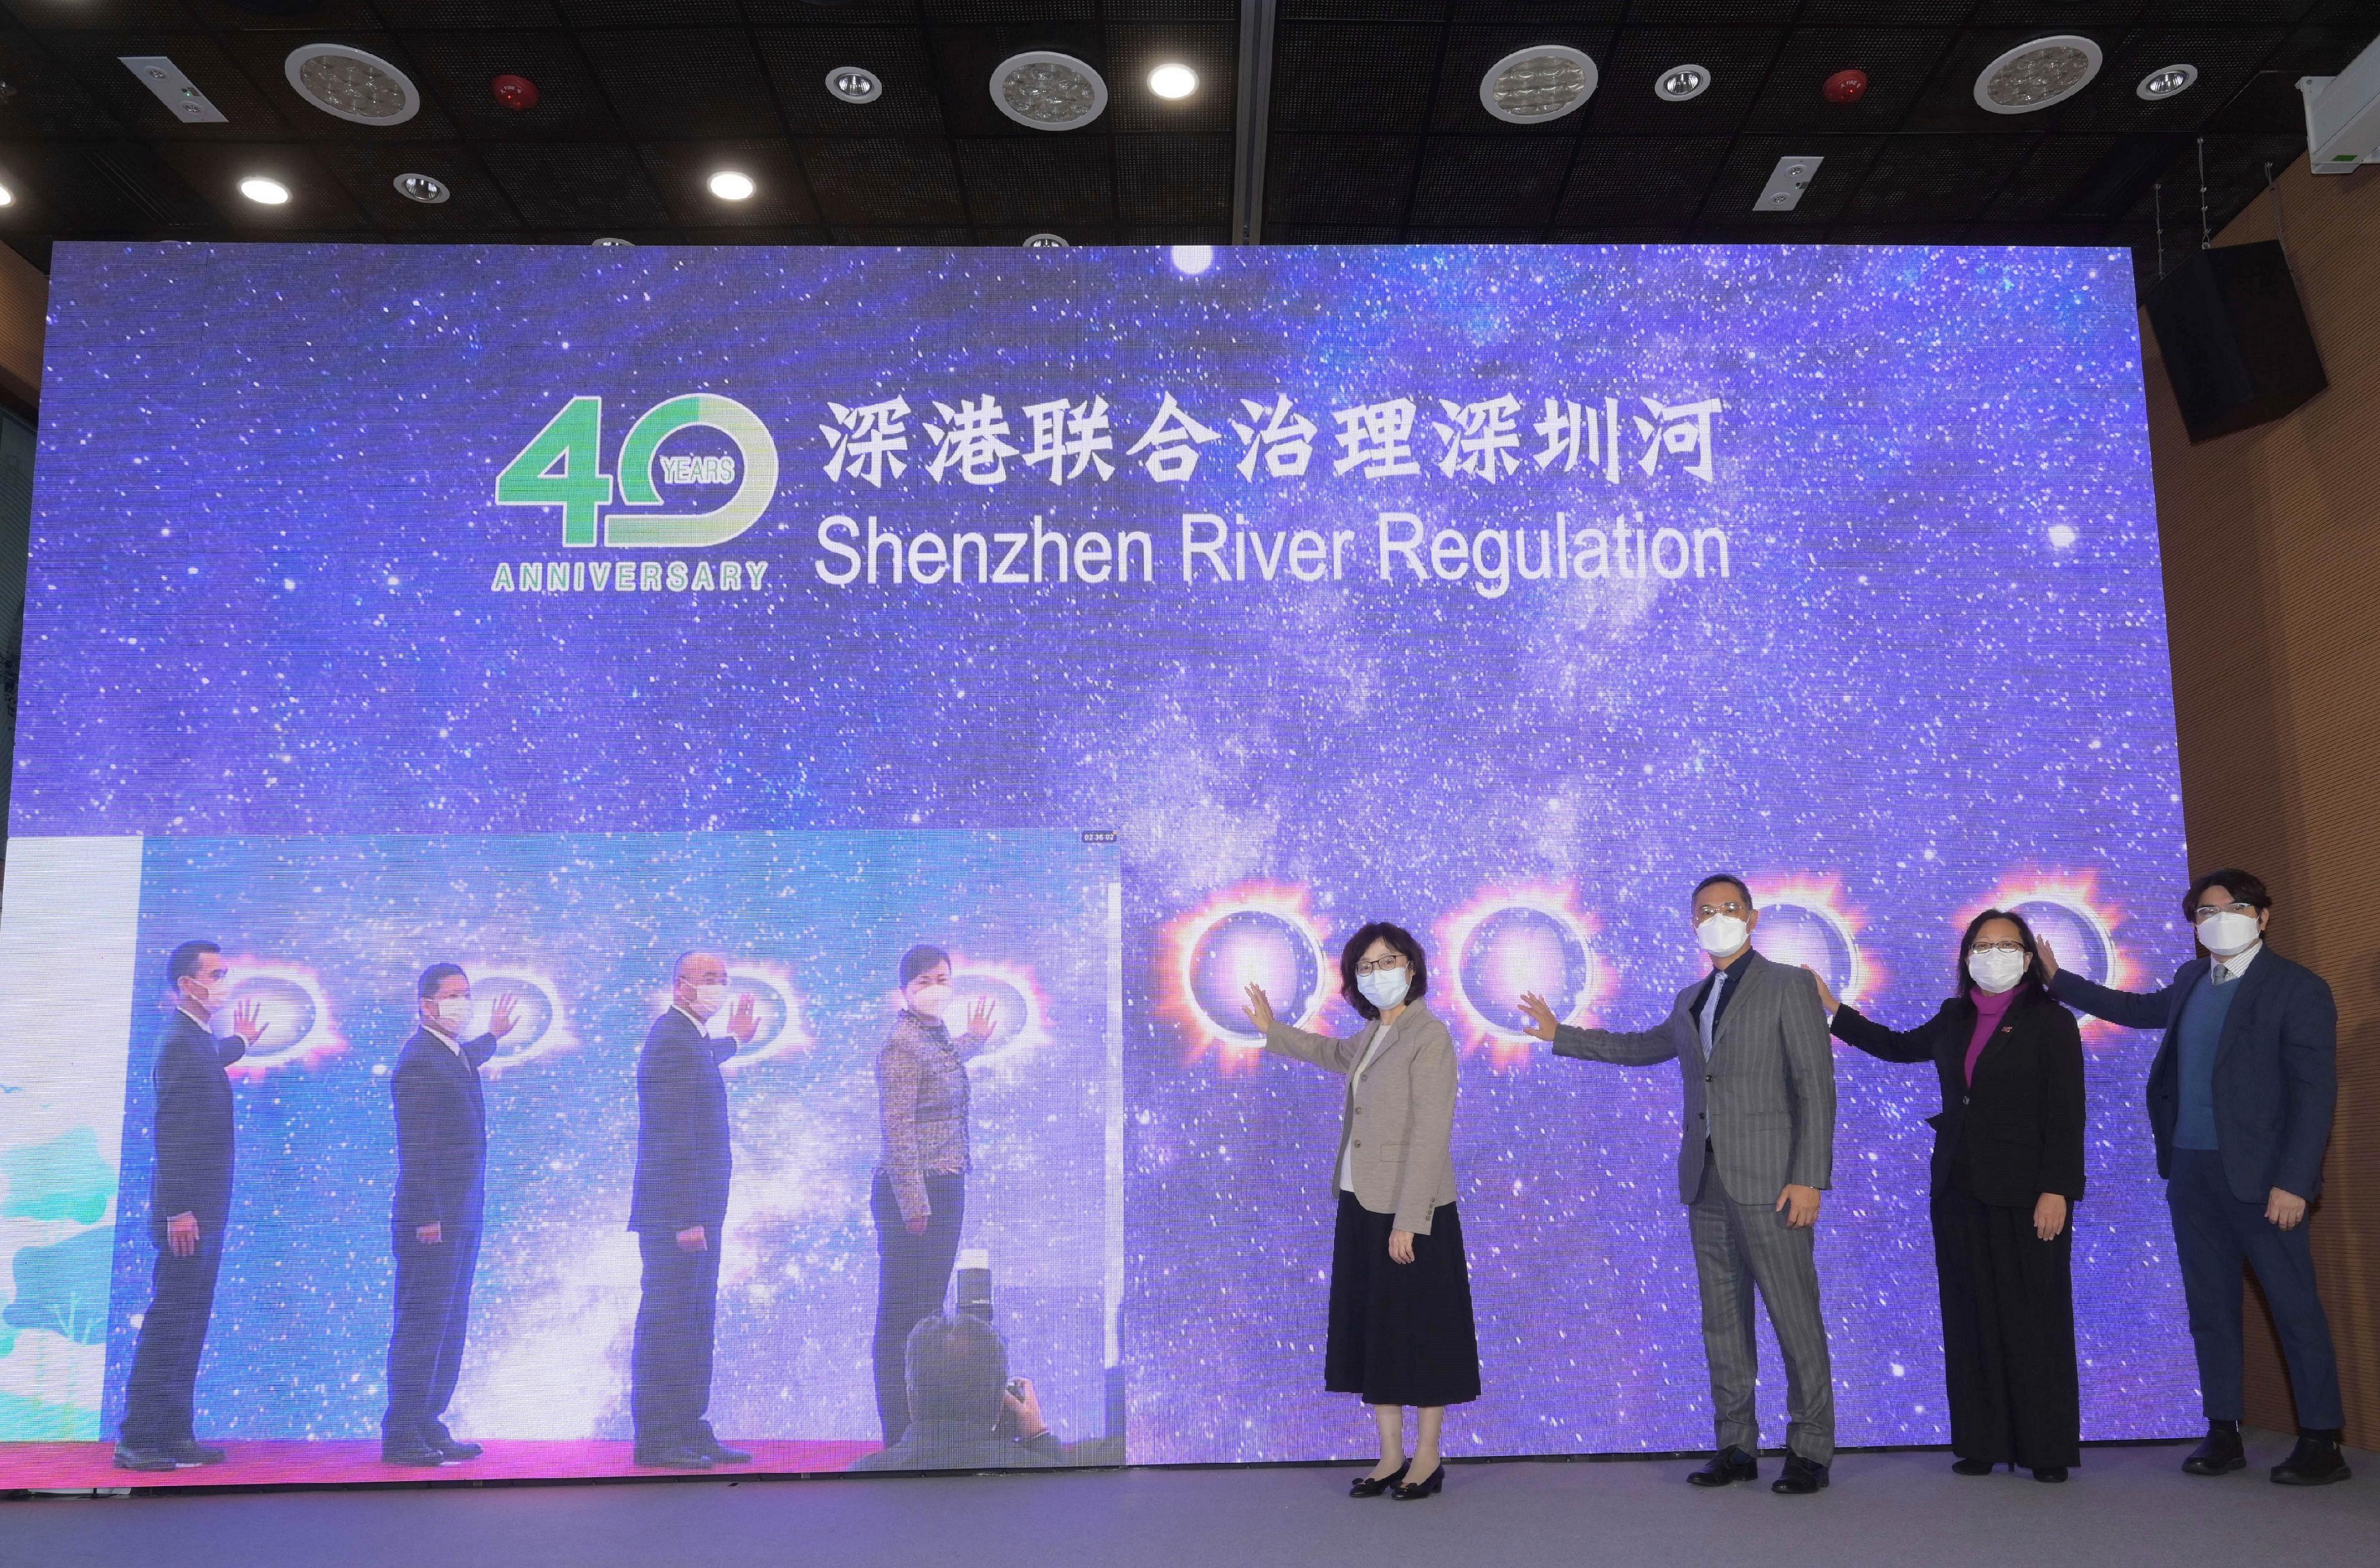 The Hong Kong Special Administrative Region Government today (December 16) jointly held a commemorative ceremony for the 40th anniversary of Shenzhen River Regulation with the Shenzhen Municipal People's Government in Hong Kong and Shenzhen respectively. Photo shows (from left) the Secretary for Development, Ms Bernadette Linn; the Permanent Secretary for Development (Works), Mr Ricky Lau; the Director of Drainage Services, Ms Alice Pang; and the Deputy Secretary for Development (Works), Mr Roger Wong, officiating at the ceremony, which was held online simultaneously at the City Gallery in Central and in Shenzhen, with (from right on screen) the Vice Mayor of Shenzhen Municipal People's Government, Ms Zhang Hua; the Deputy Secretary-General of Shenzhen Municipal People's Government, Mr Liu Ang; the Director-General of Water Authority of Shenzhen Municipality, Mr Hu Jiadong; and the Deputy Director-General of Water Authority of Shenzhen Municipality, Mr Huang Haitao.